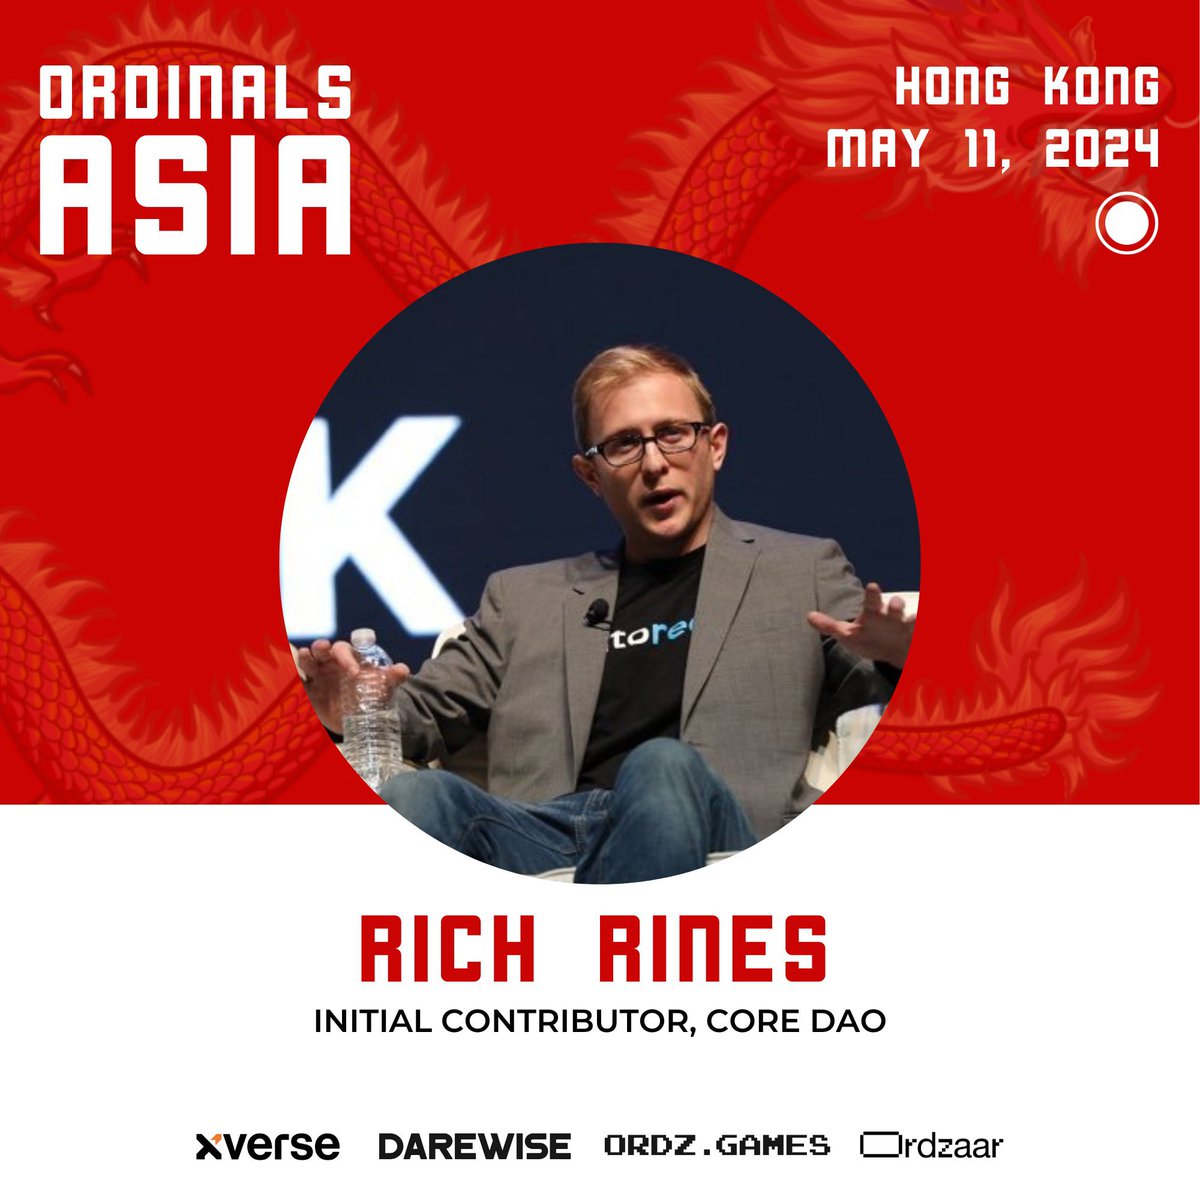 Soon! #CORE 🔶 #ORDINALS #ASIA 
@richrines will be speaking at @Ordinals_Asia in Hong Kong!
#SatoshiPlusConsensus #Bitcoin  🟧
#EVM #Roadto100 🟧🔒🔶